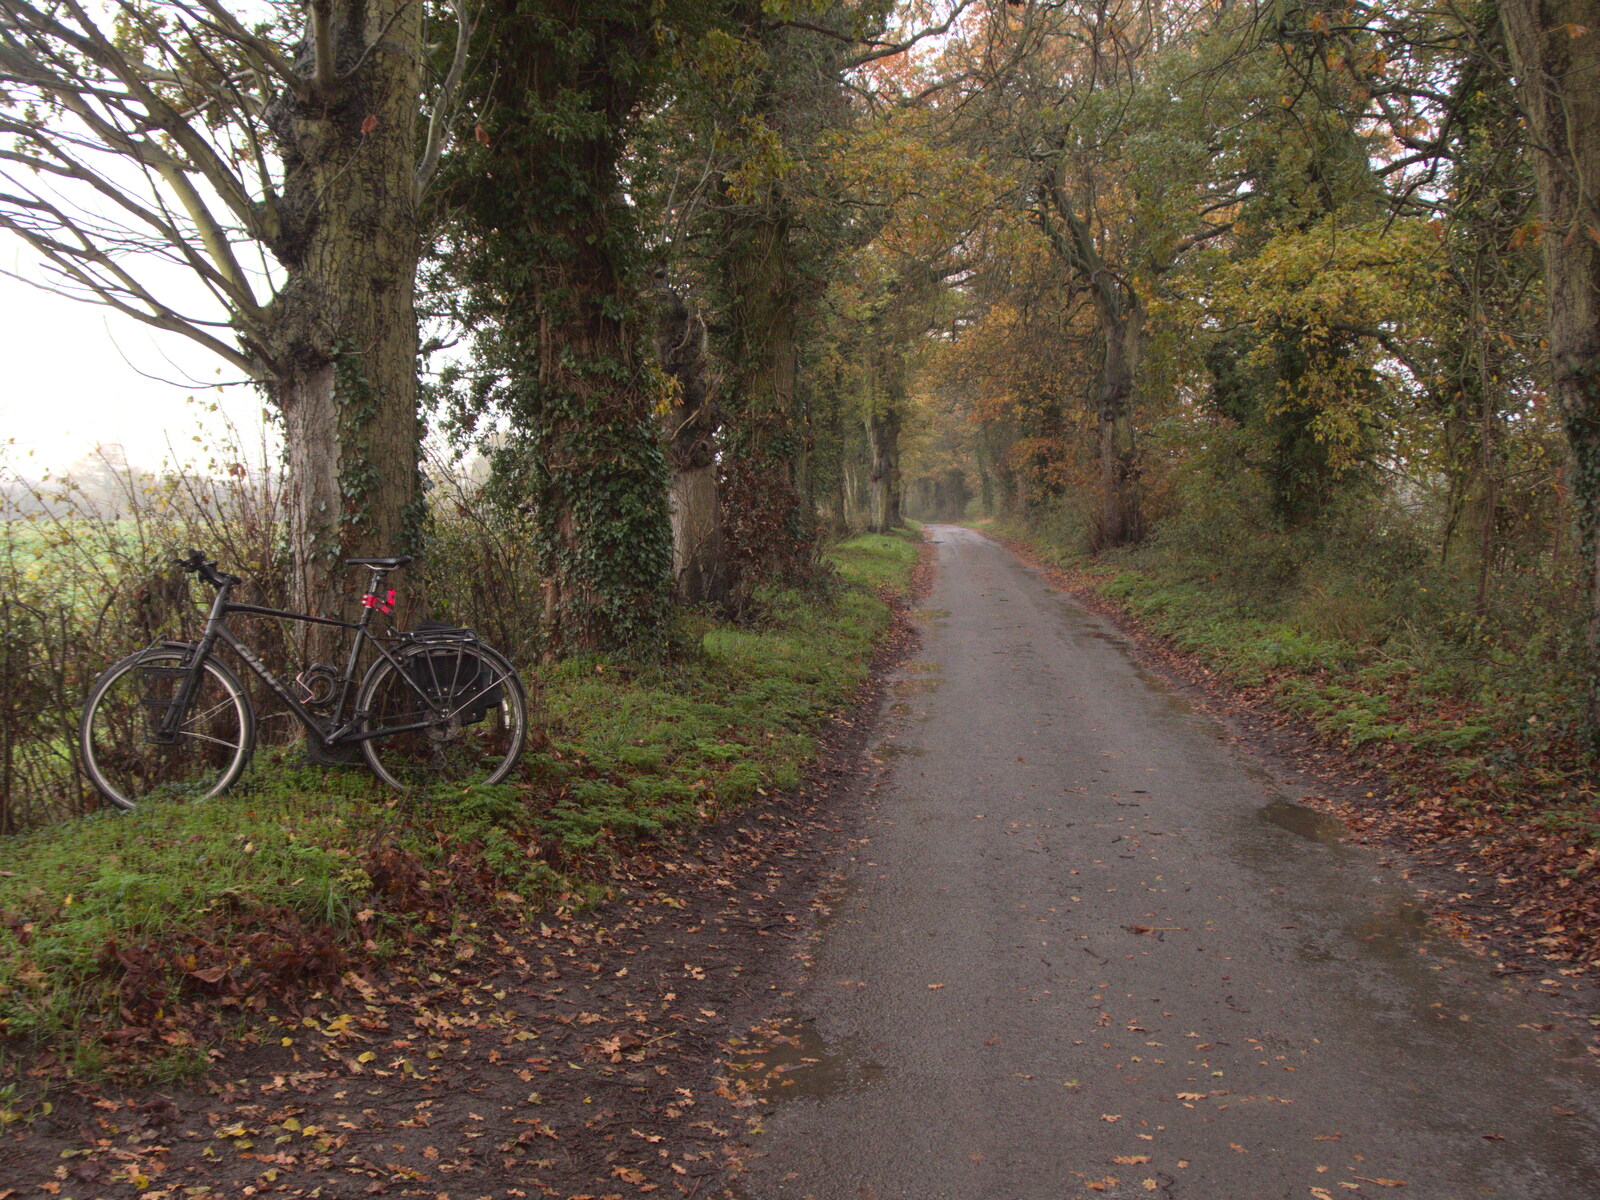 Nosher's bike leans against a tree from Pre-Lockdown in Station 119, Eye, Suffolk - 4th November 2020